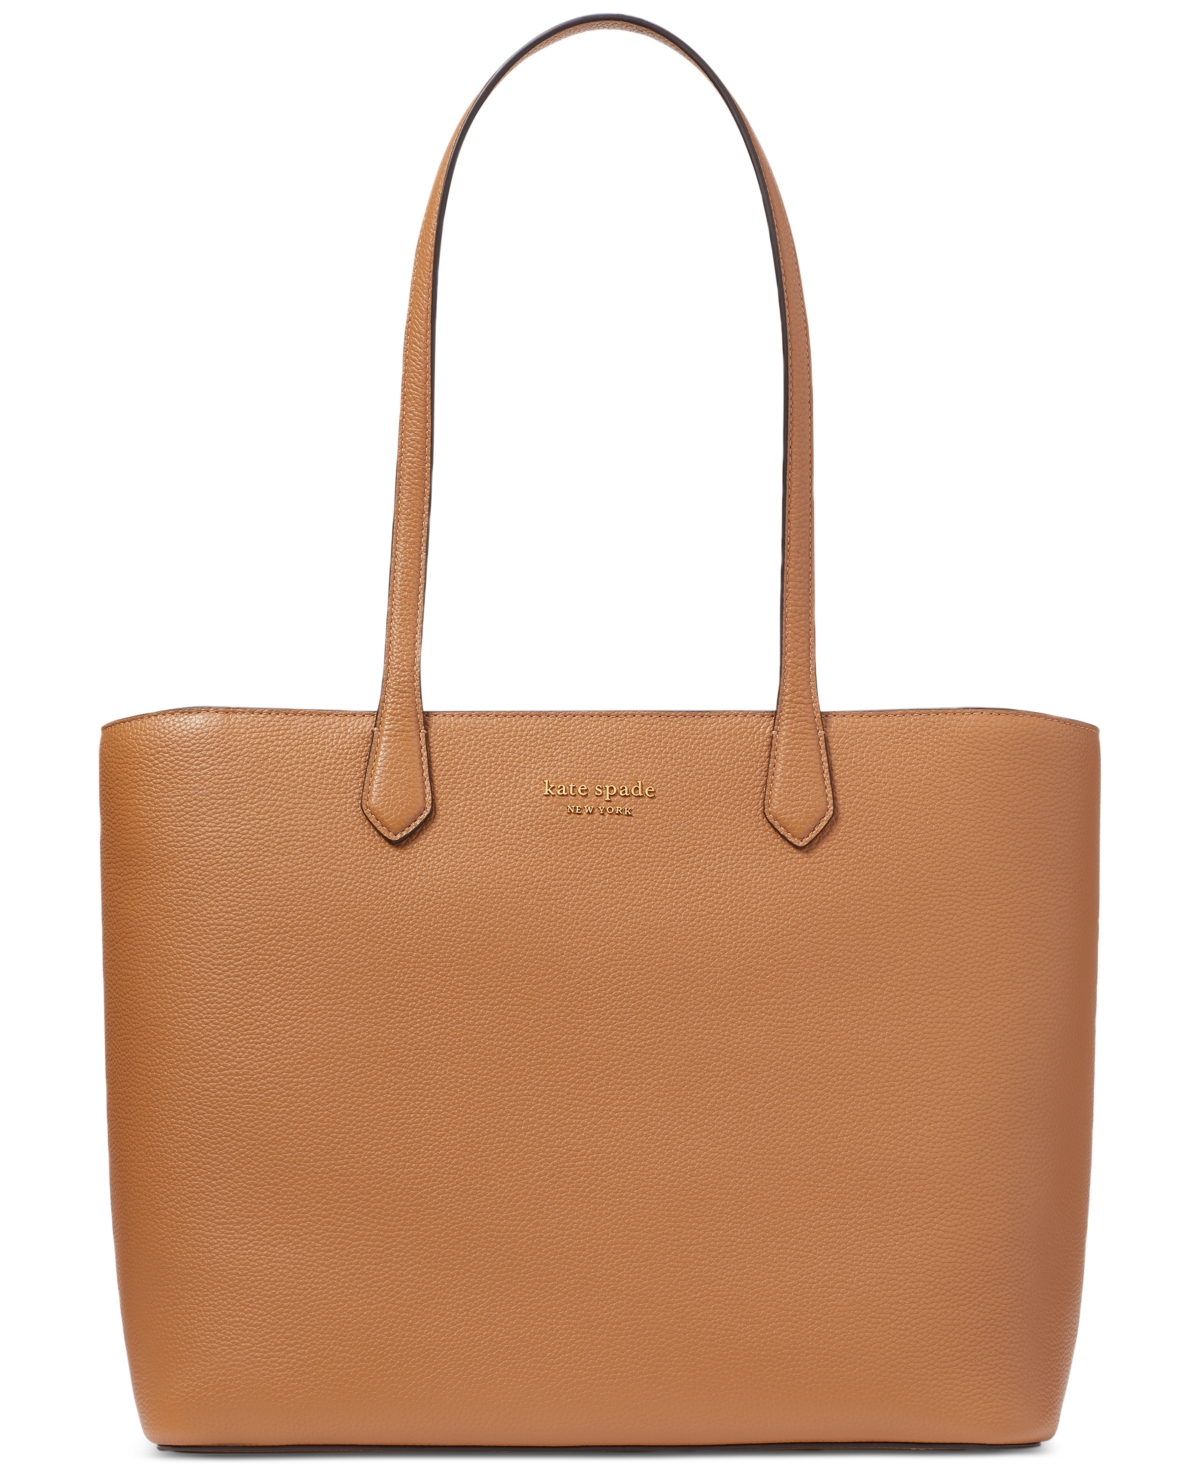 Kate Spade New York Market Medium Pebbled Leather Tote In Bungalow